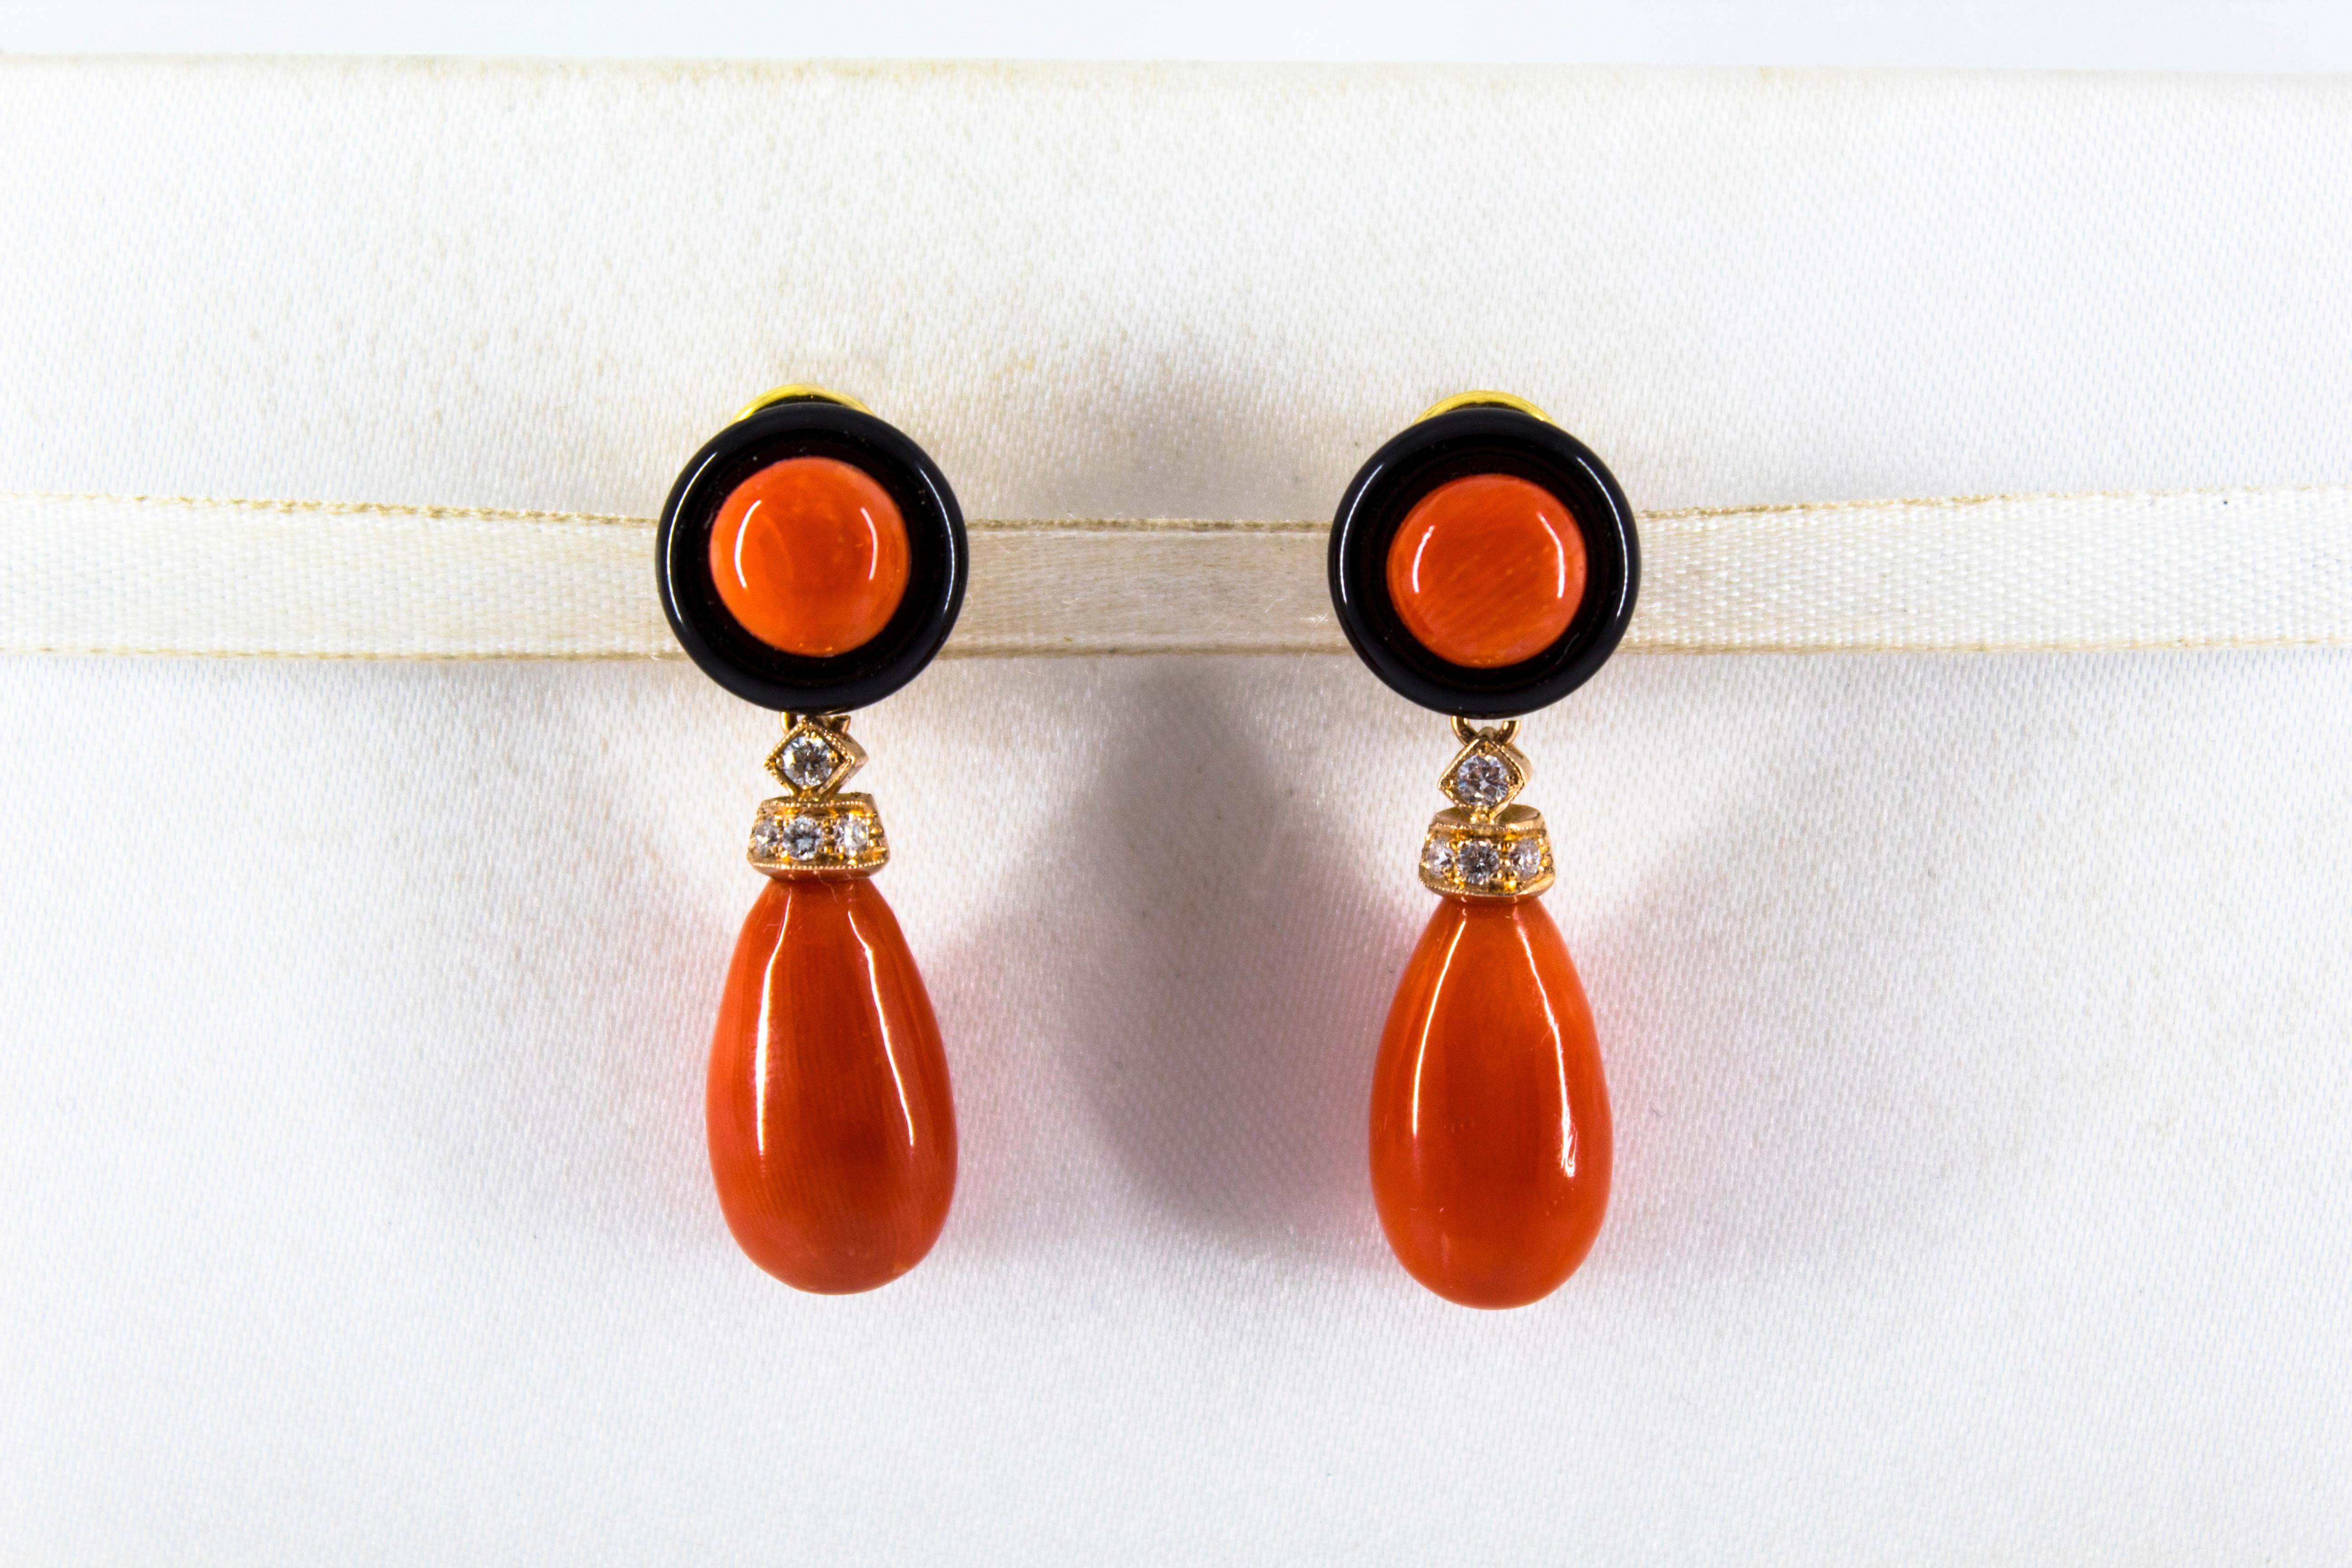 These Clip-On Earrings are made of 14K Yellow Gold with 18K Yellow Gold Clips.
These Earrings have 0.18 Carats of White Diamonds.
These Earrings have Red Mediterranean (Sardinia, Italy) Coral.
These Earrings have also Onyx.
All our Earrings have